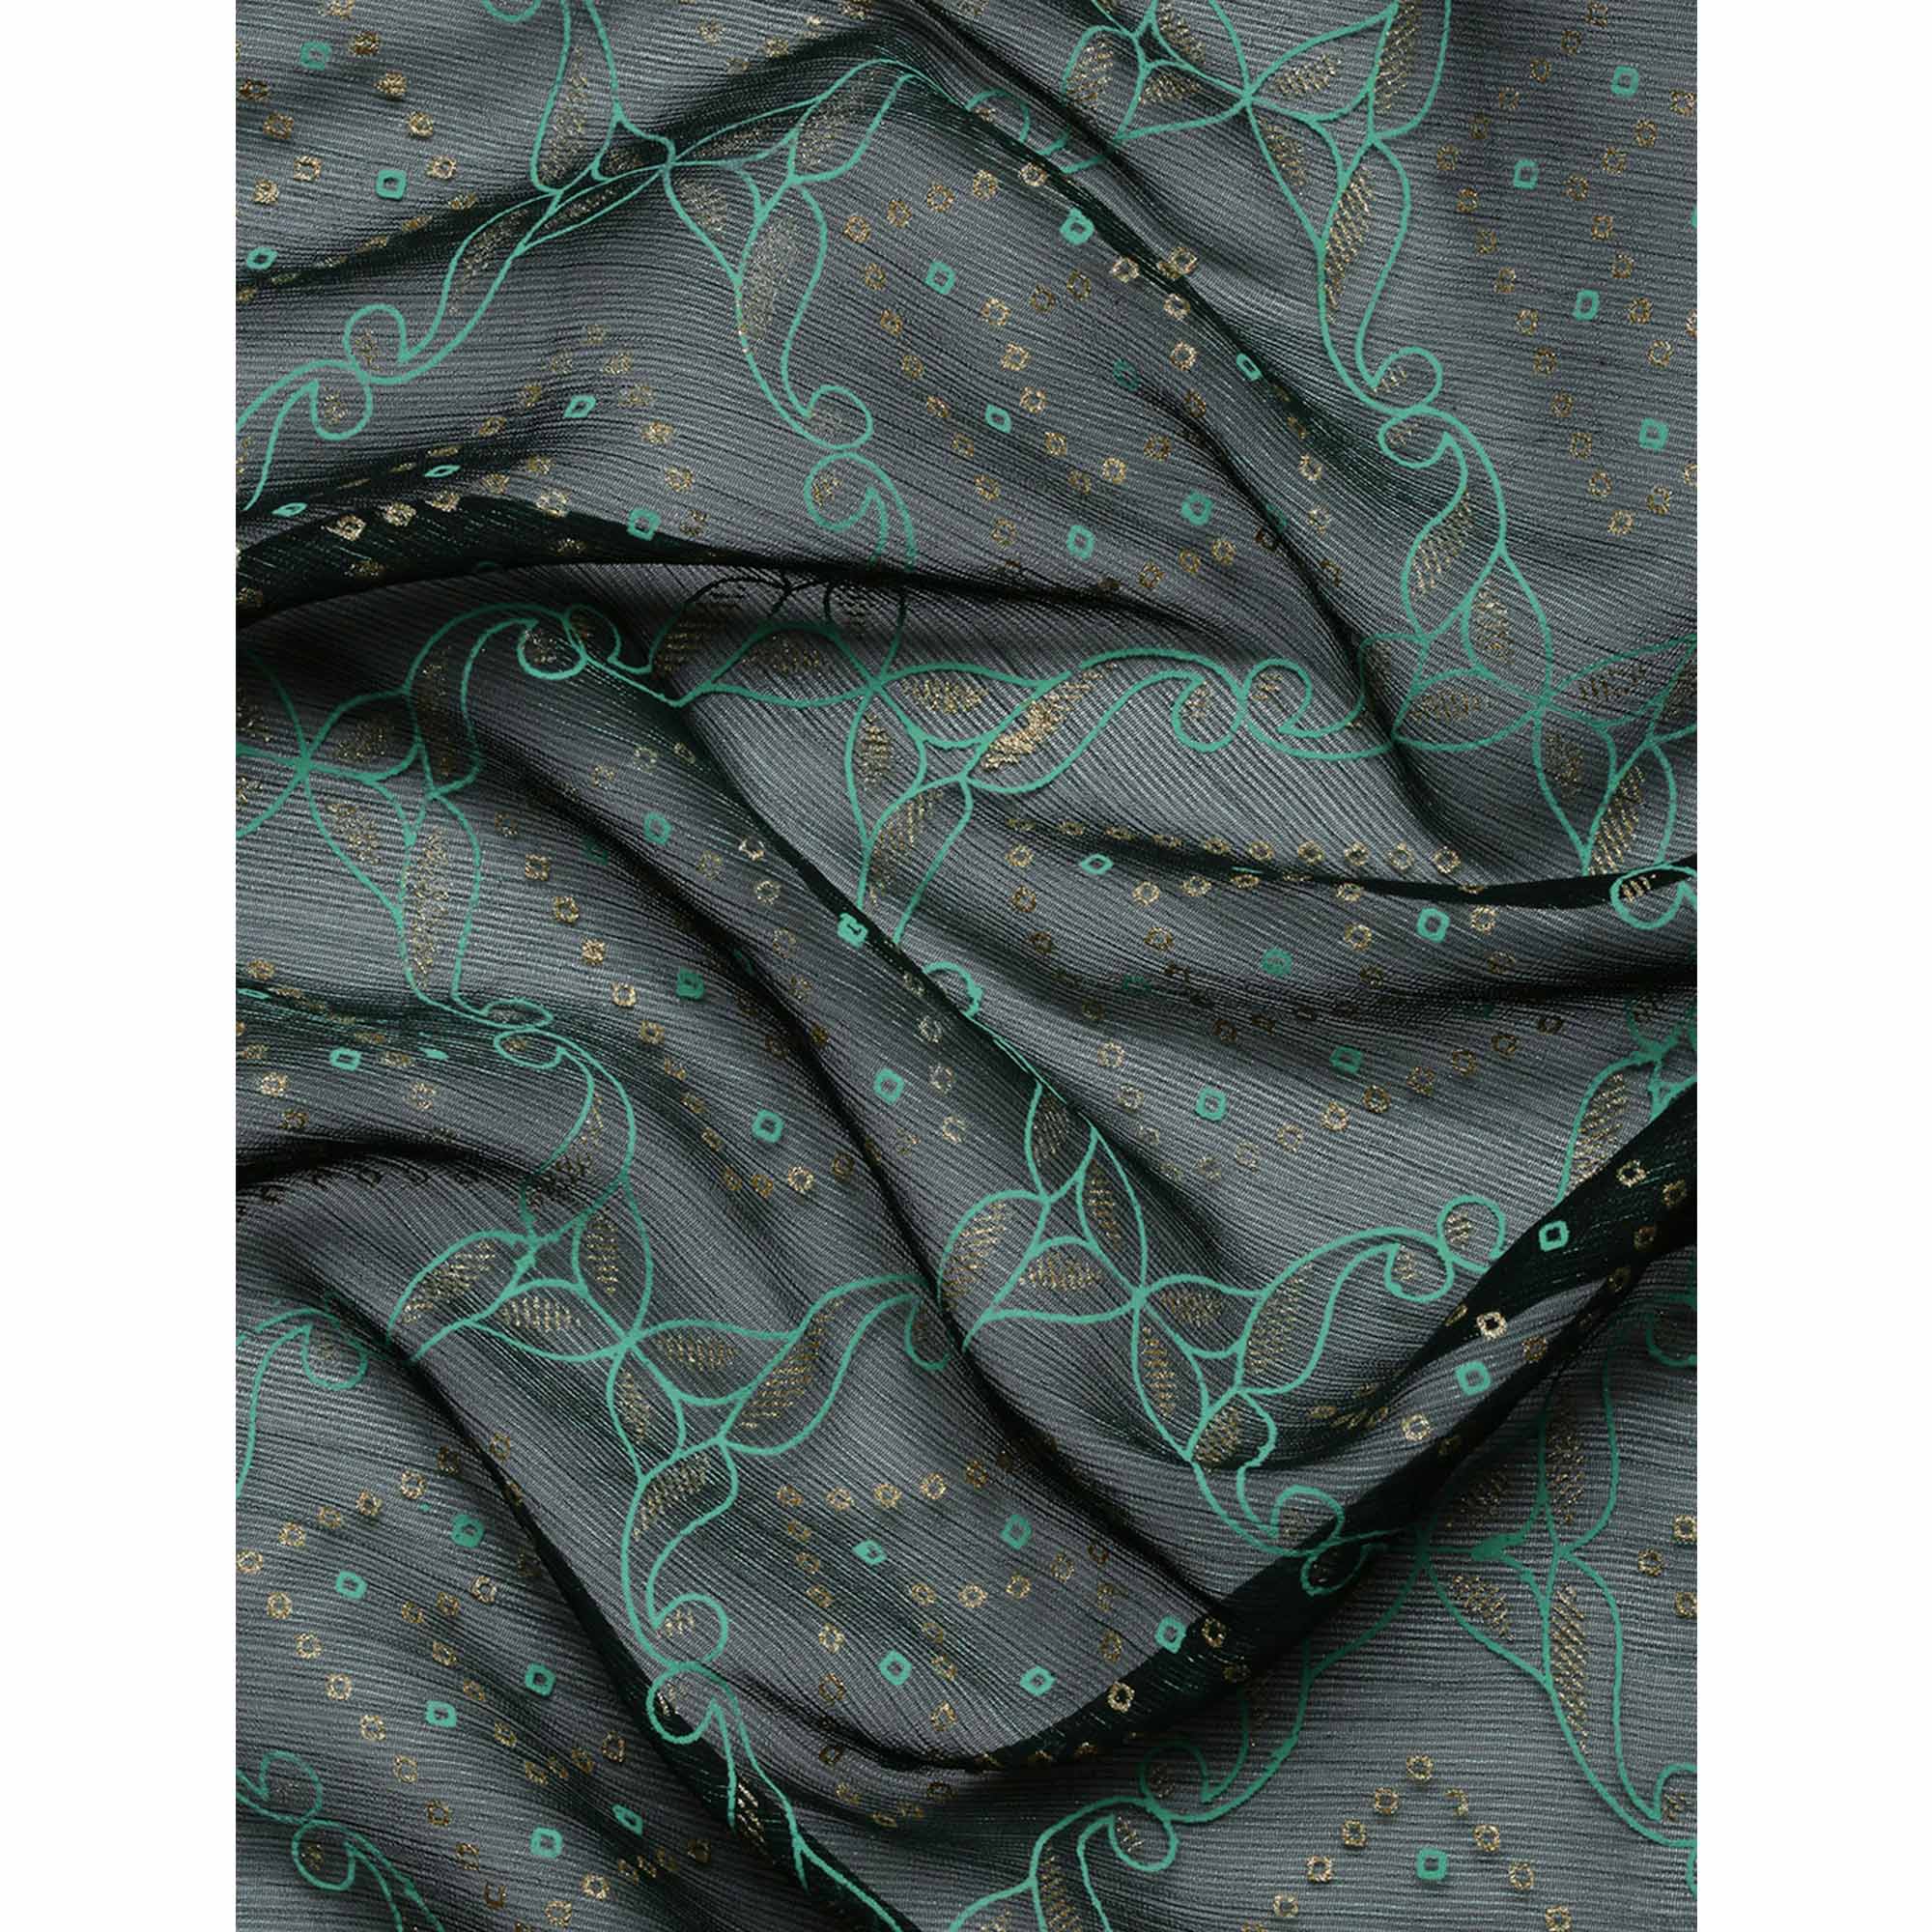 Green Foil Printed With Fancy Border Chiffon Saree